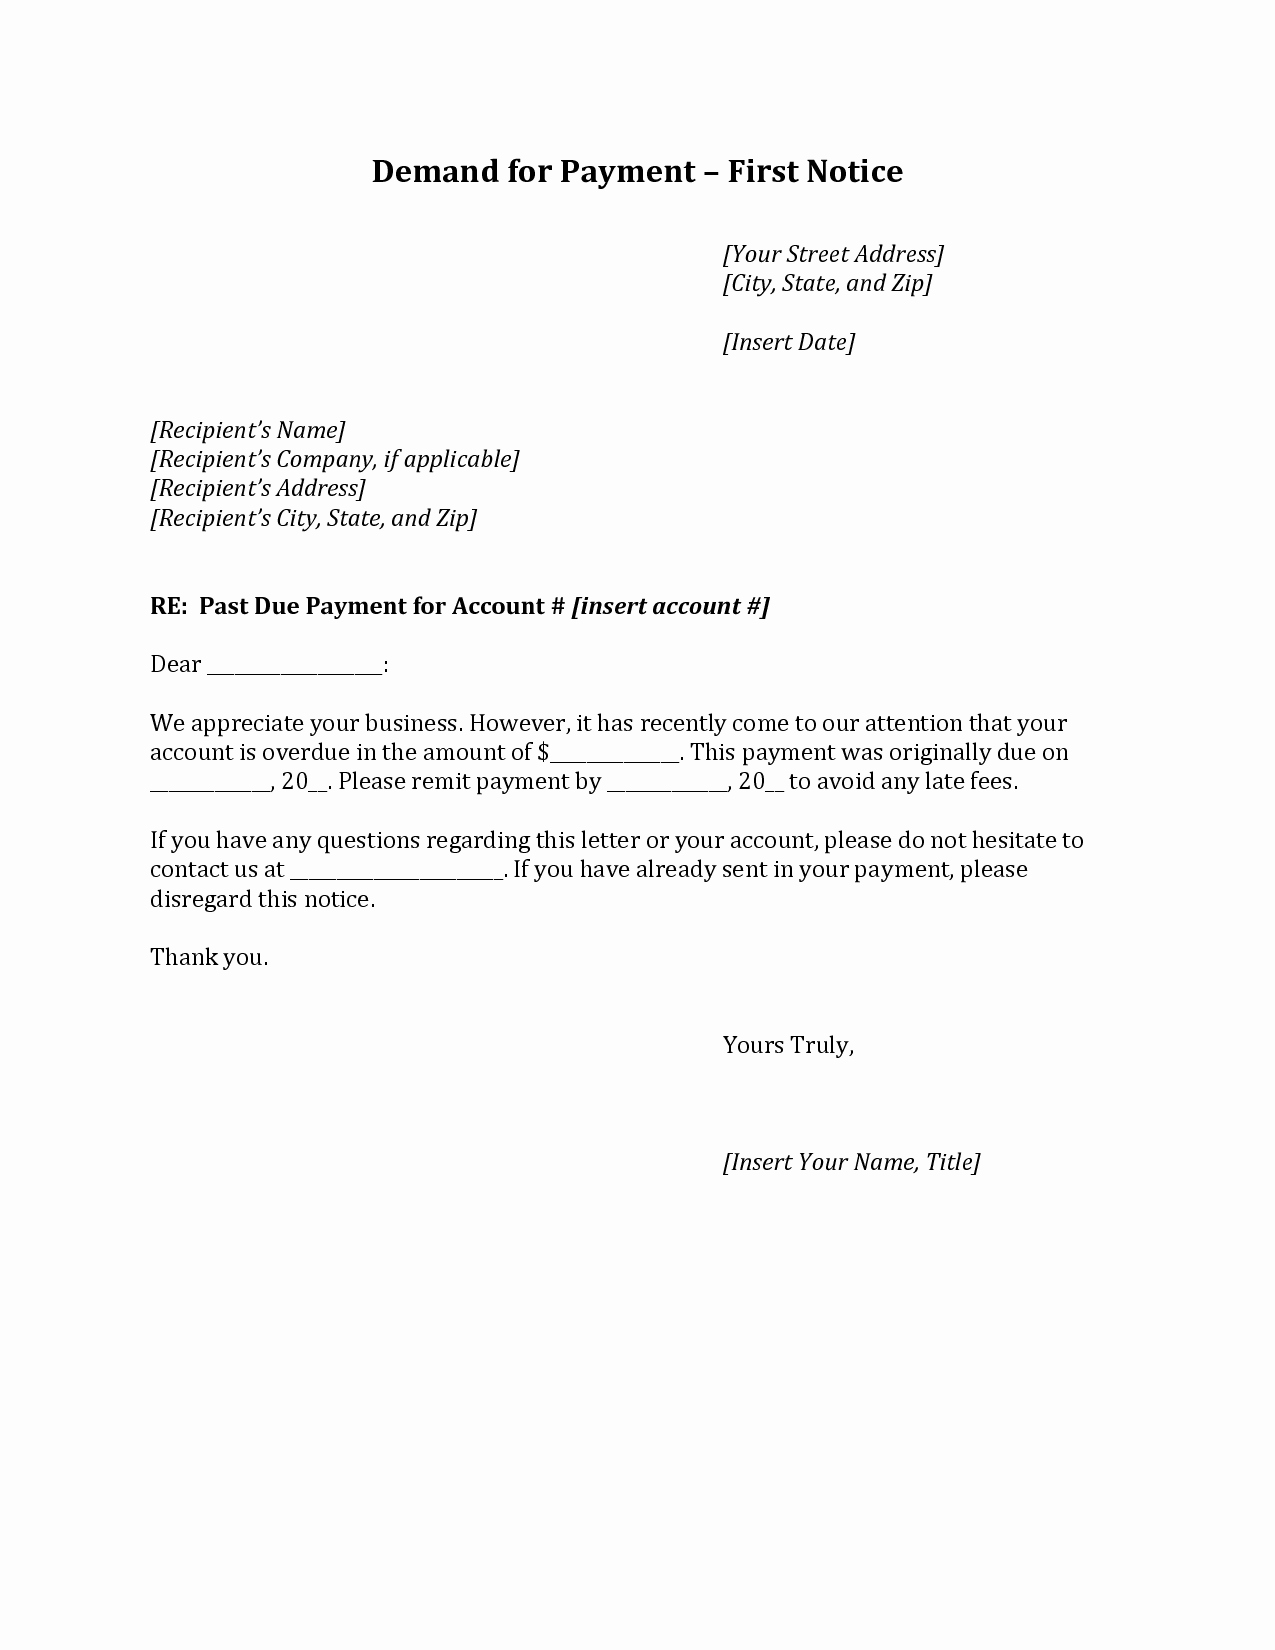 10 Day Payoff Letter Template Fresh How to Write A Demand Letter for Payment Sample